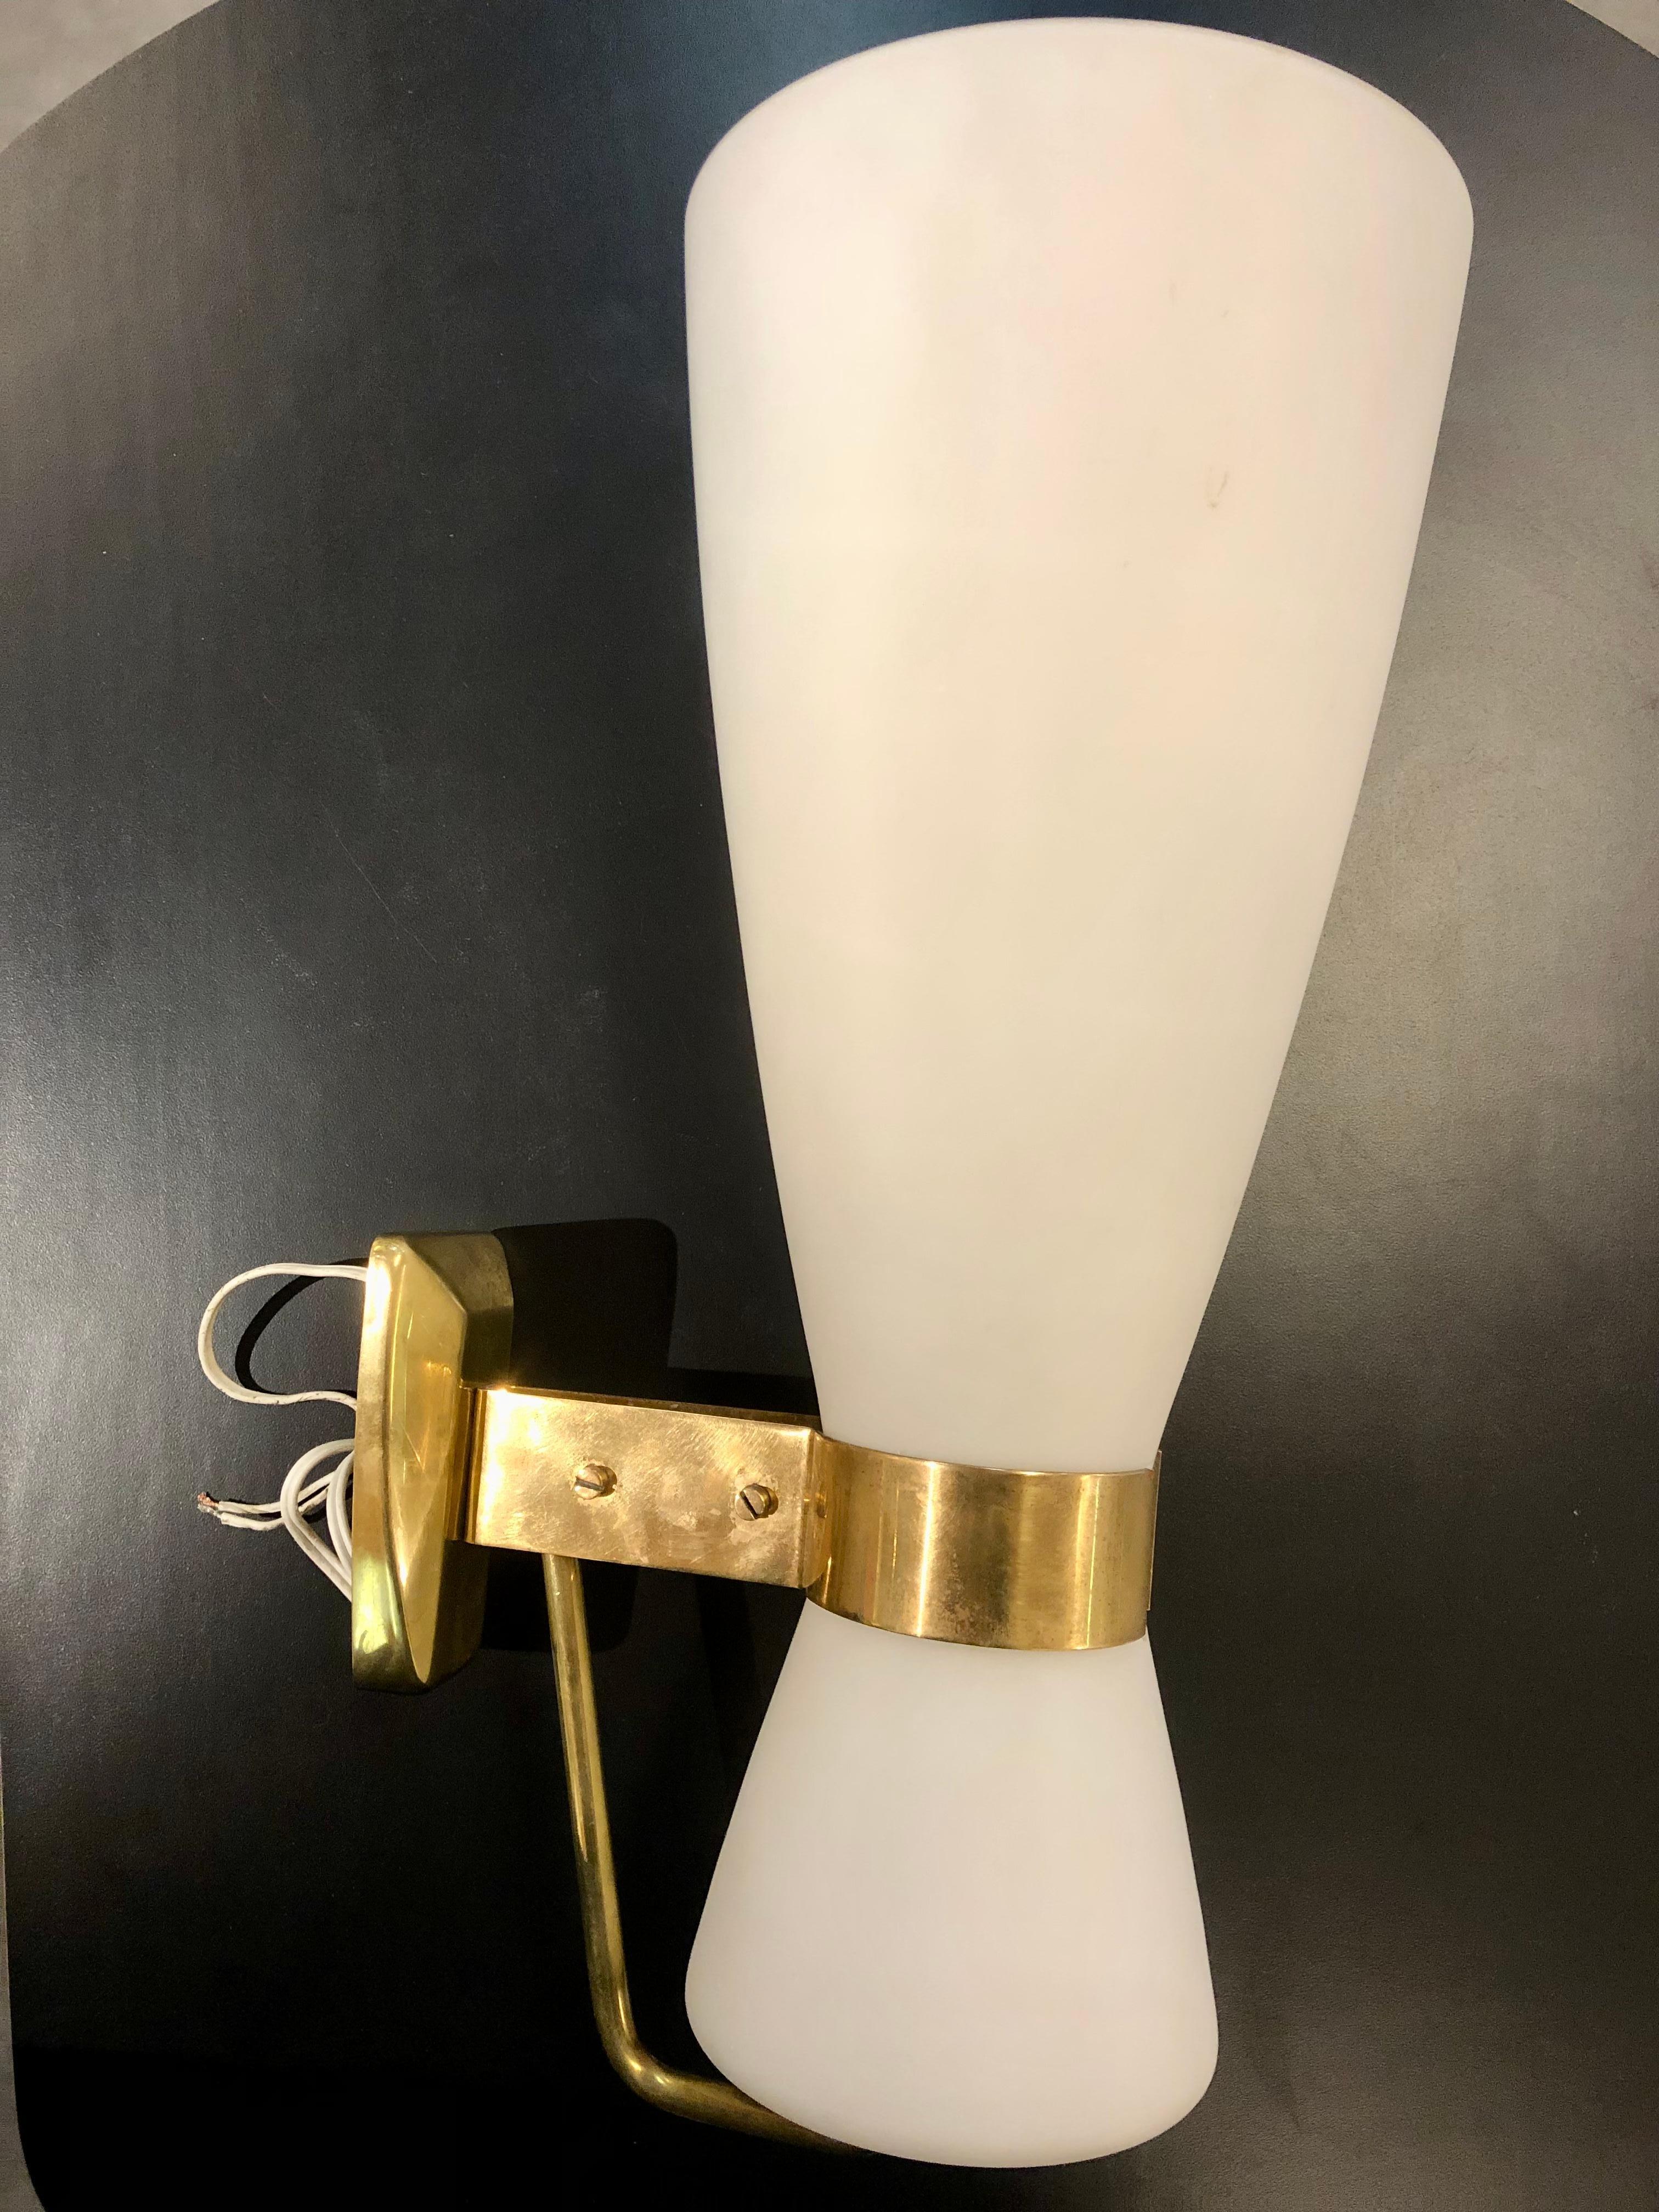 Very impressive sconce by stilnovo this is the big version 48cm high .
Stamped stilnovo in copper and a sticker inside de brass holders.
Very good condition and original design.
Referenced as the 2087 model.